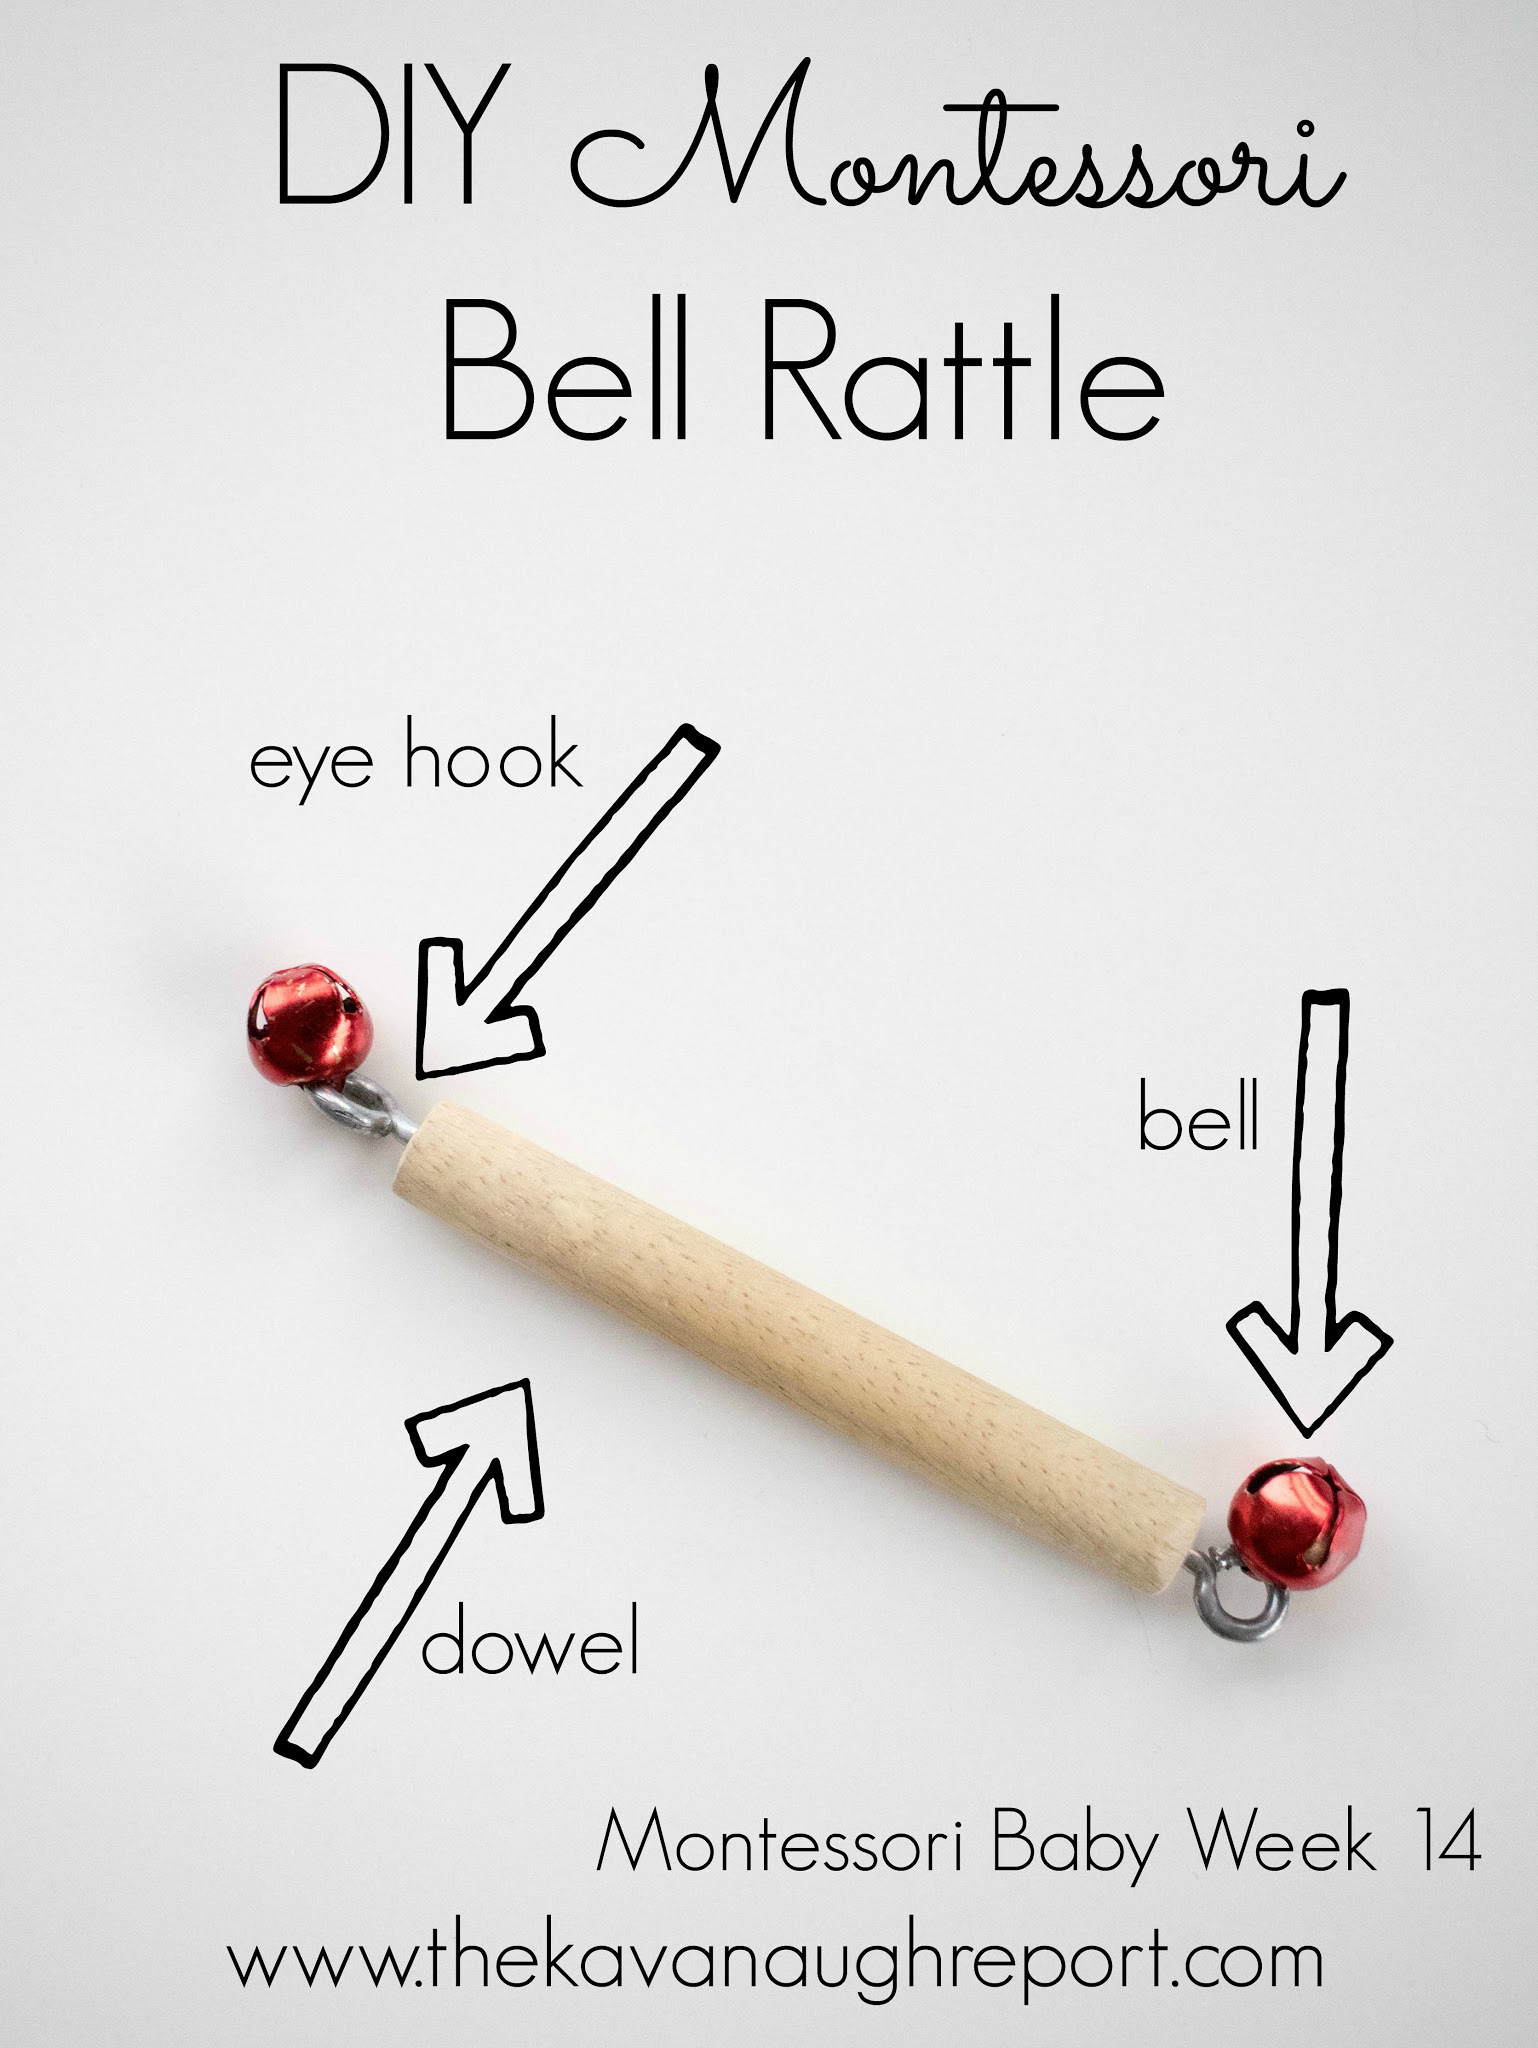 The Montessori bell rattle is a perfect first toy for babies. This soothing rattle is easy to grab, entertaining and an easy DIY.